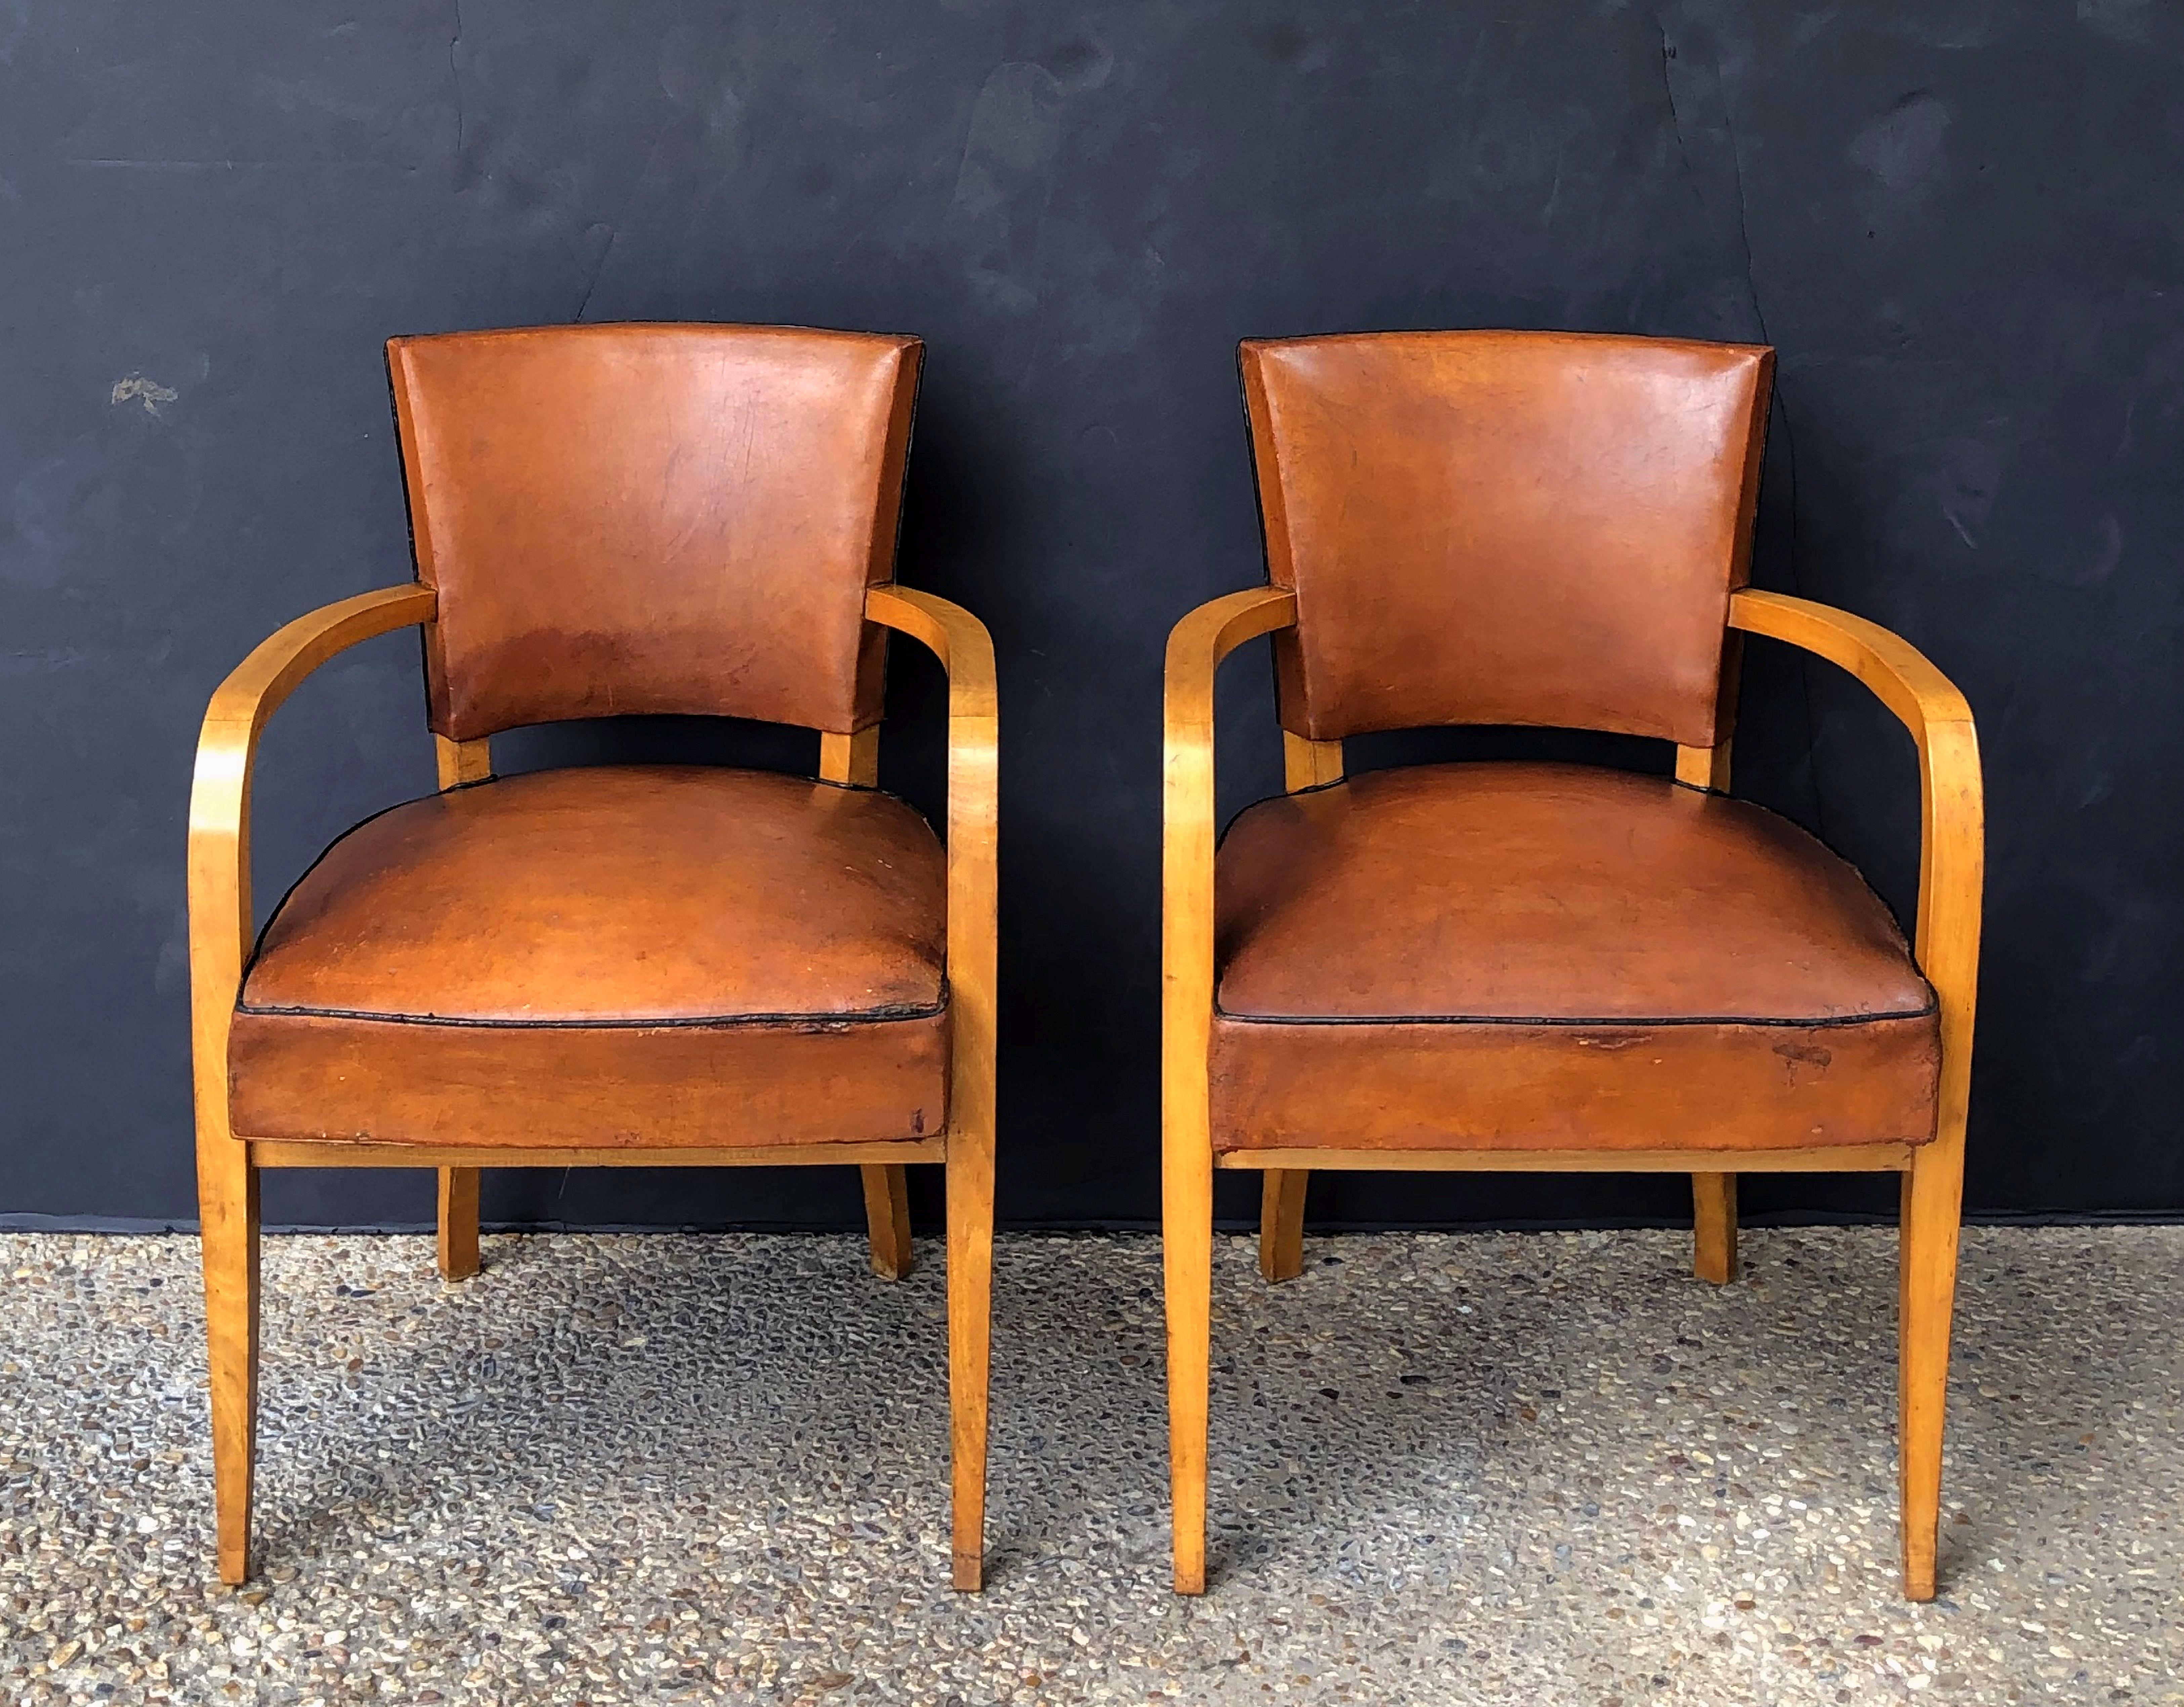 A handsome pair of French armchairs or bridge chairs, each chair featuring comfortable backs and seats upholstered in leather over a stylish wooden frame with tapering legs.

Dimensions: Height 31 inches x width 21 3/4 inches x depth 20 1/2